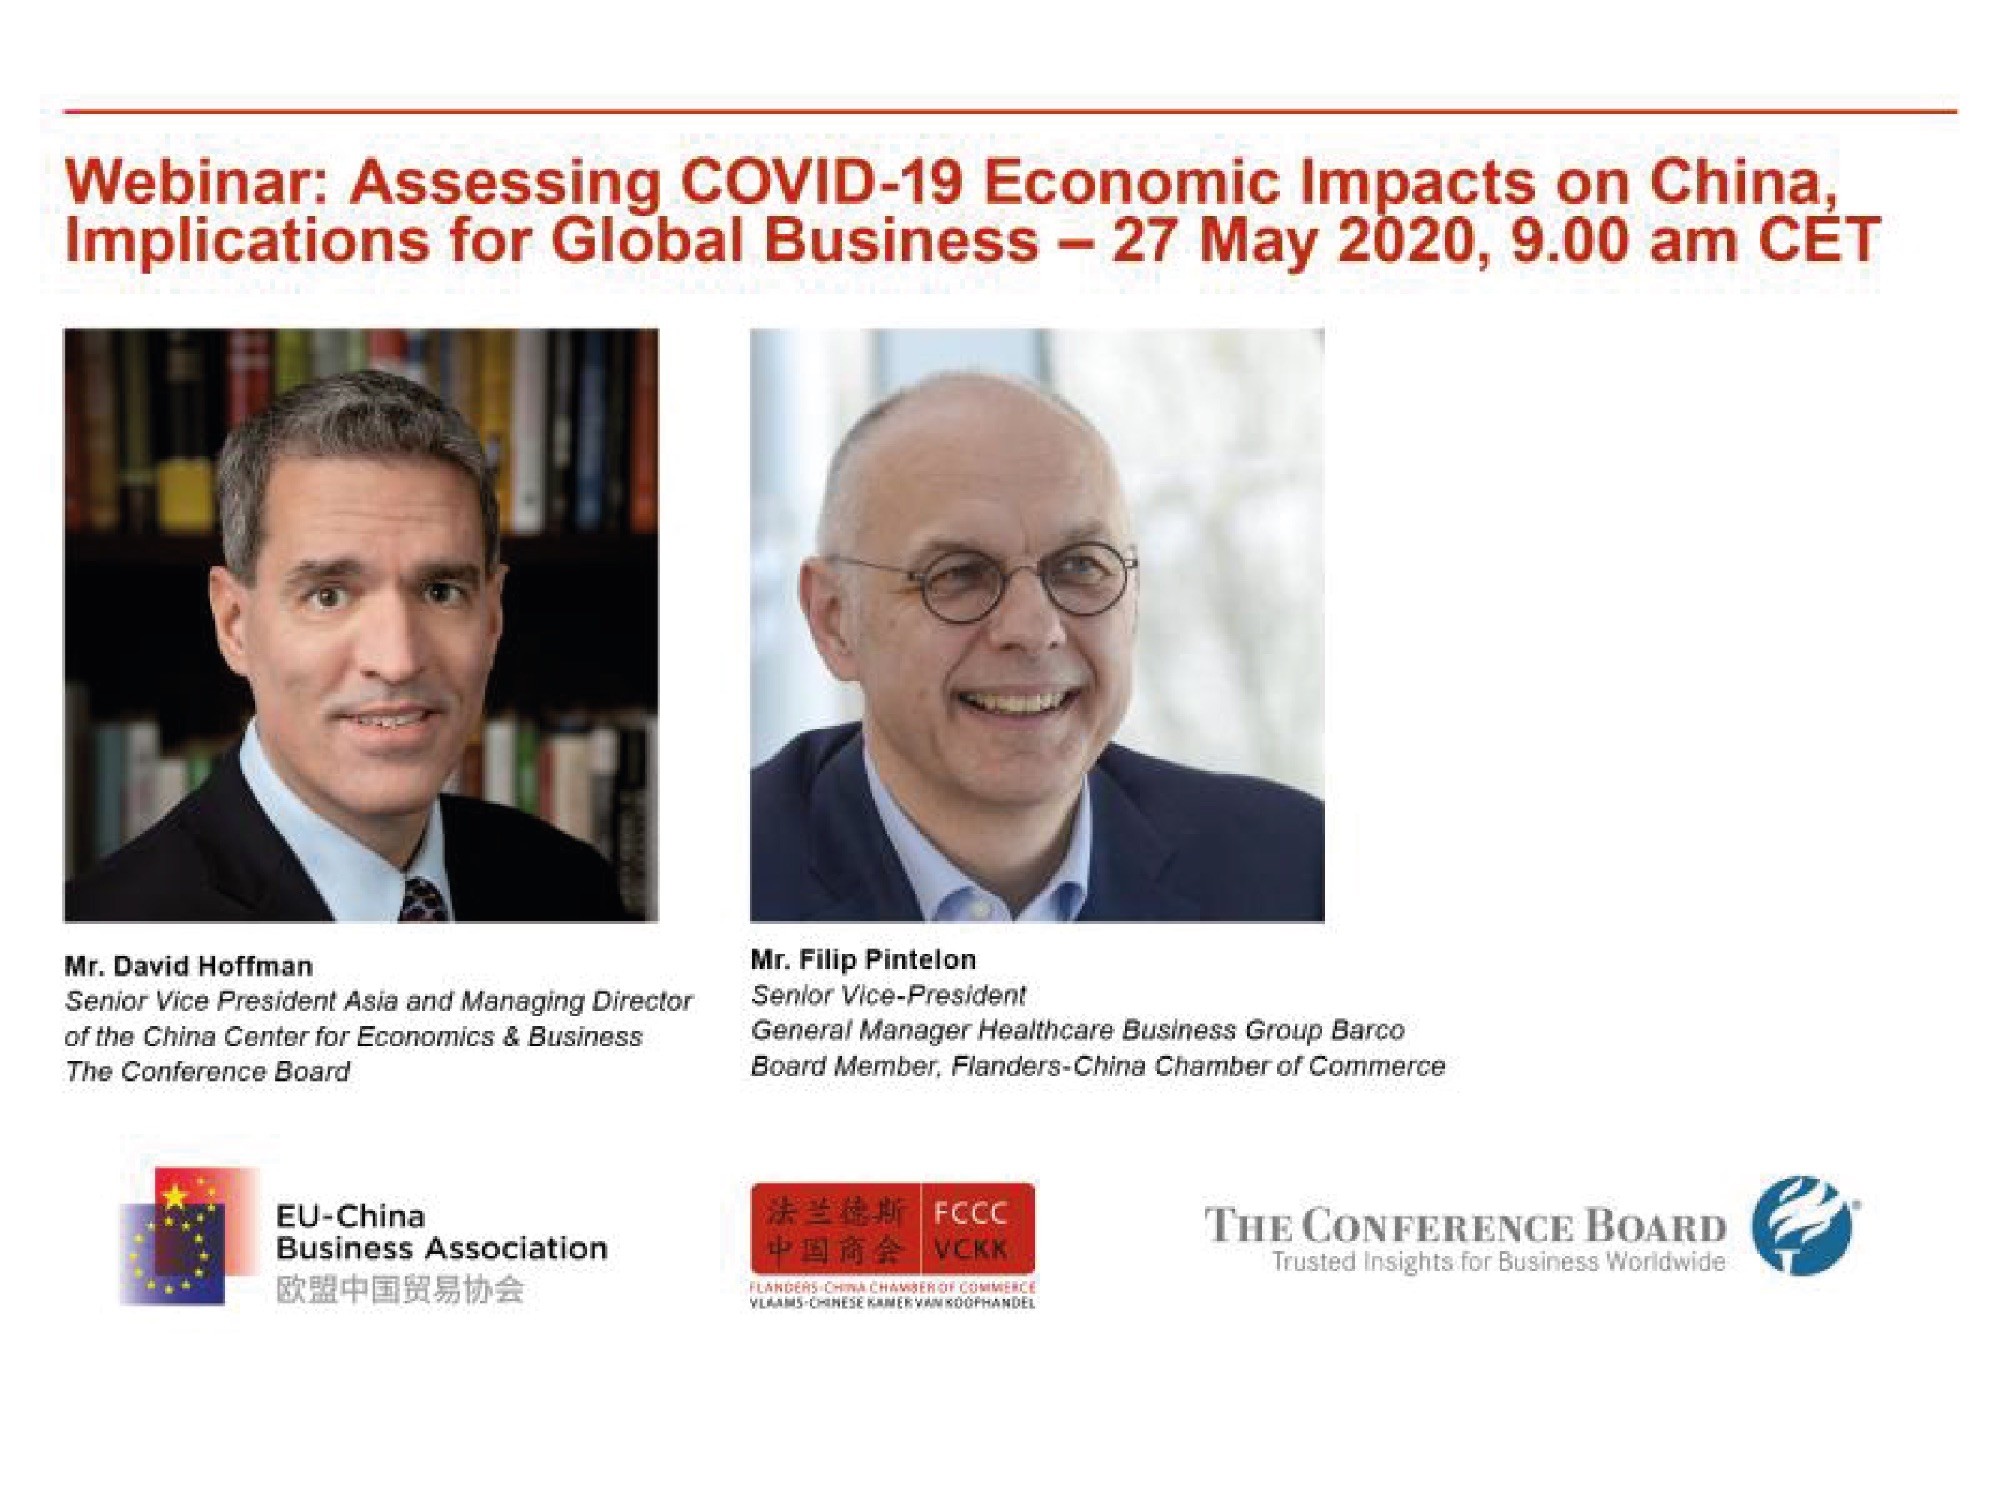 Webinar: Assessing COVID-19 Economic Impacts on China - Implications for Global Business